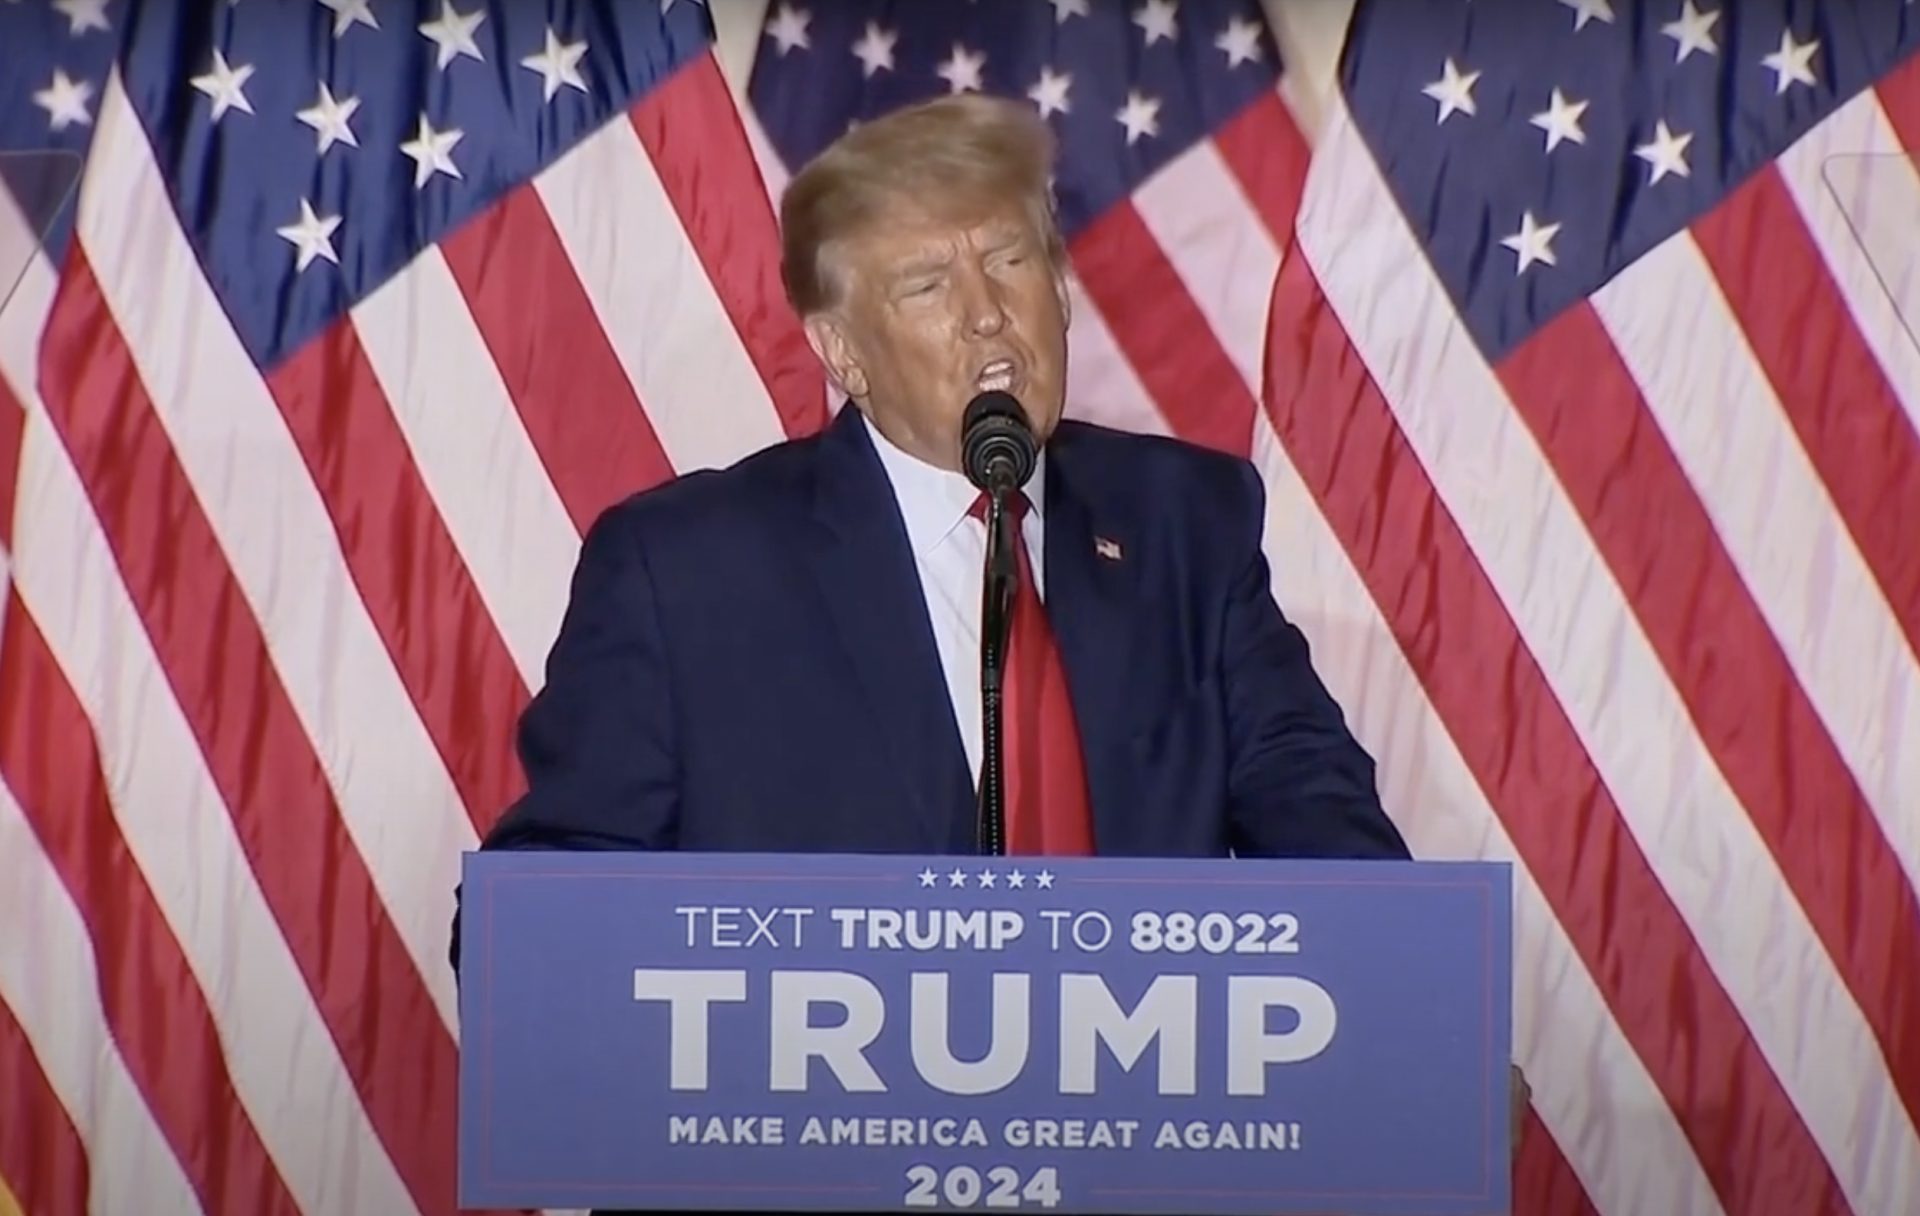 Trump Announces He’ll Be Running for President in 2024 to ‘Make America